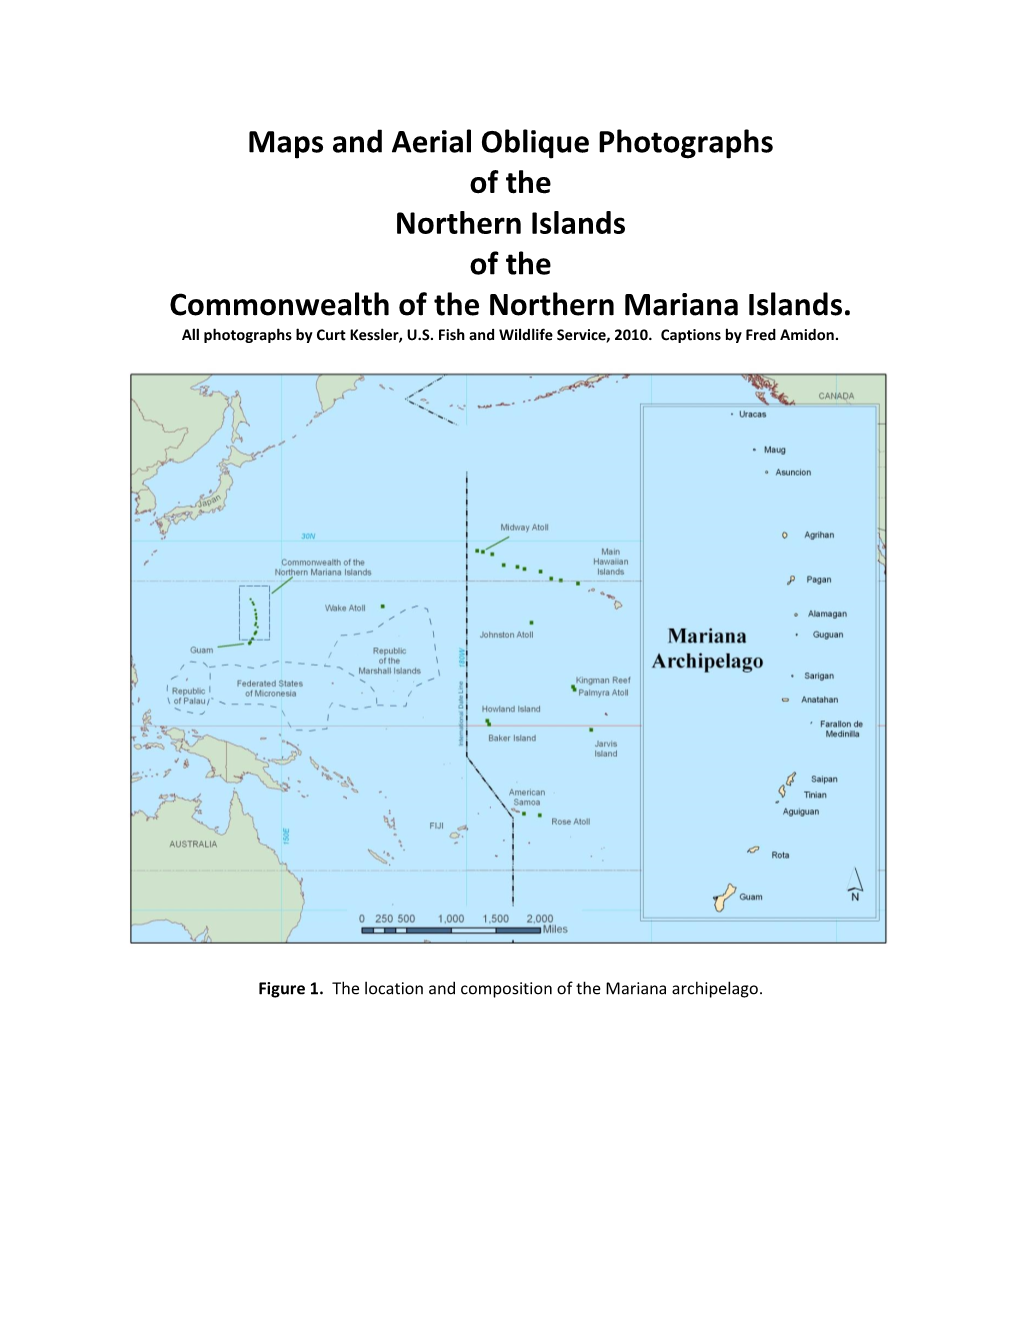 Maps and Aerial Oblique Photographs of the Northern Islands of the Commonwealth of the Northern Mariana Islands